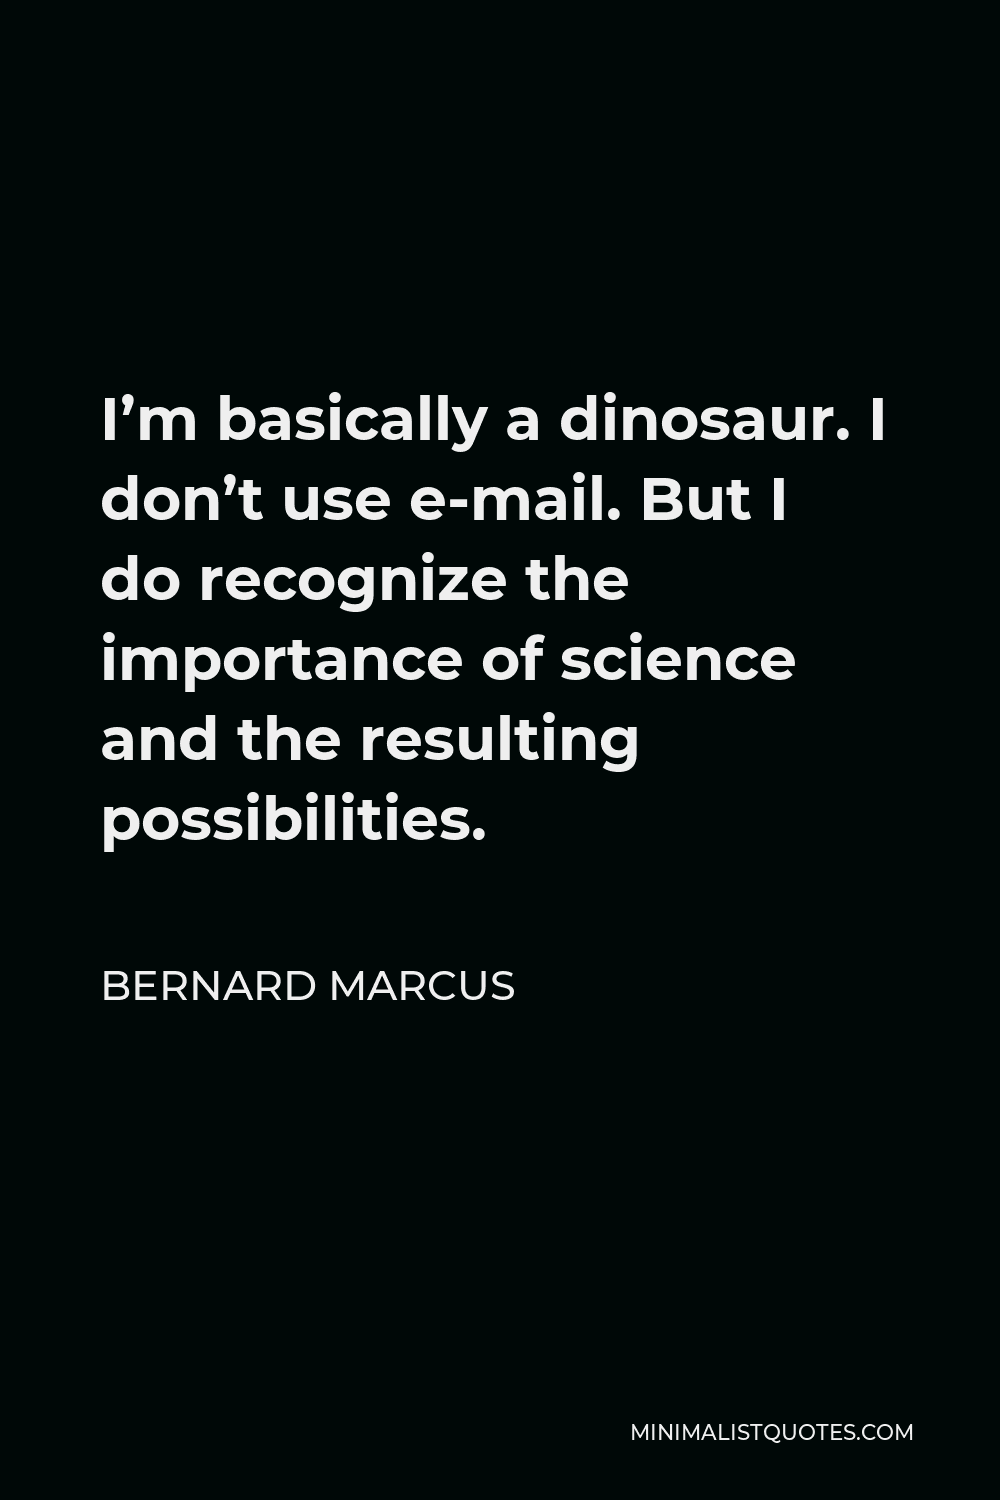 Bernard Marcus Quote - I’m basically a dinosaur. I don’t use e-mail. But I do recognize the importance of science and the resulting possibilities.